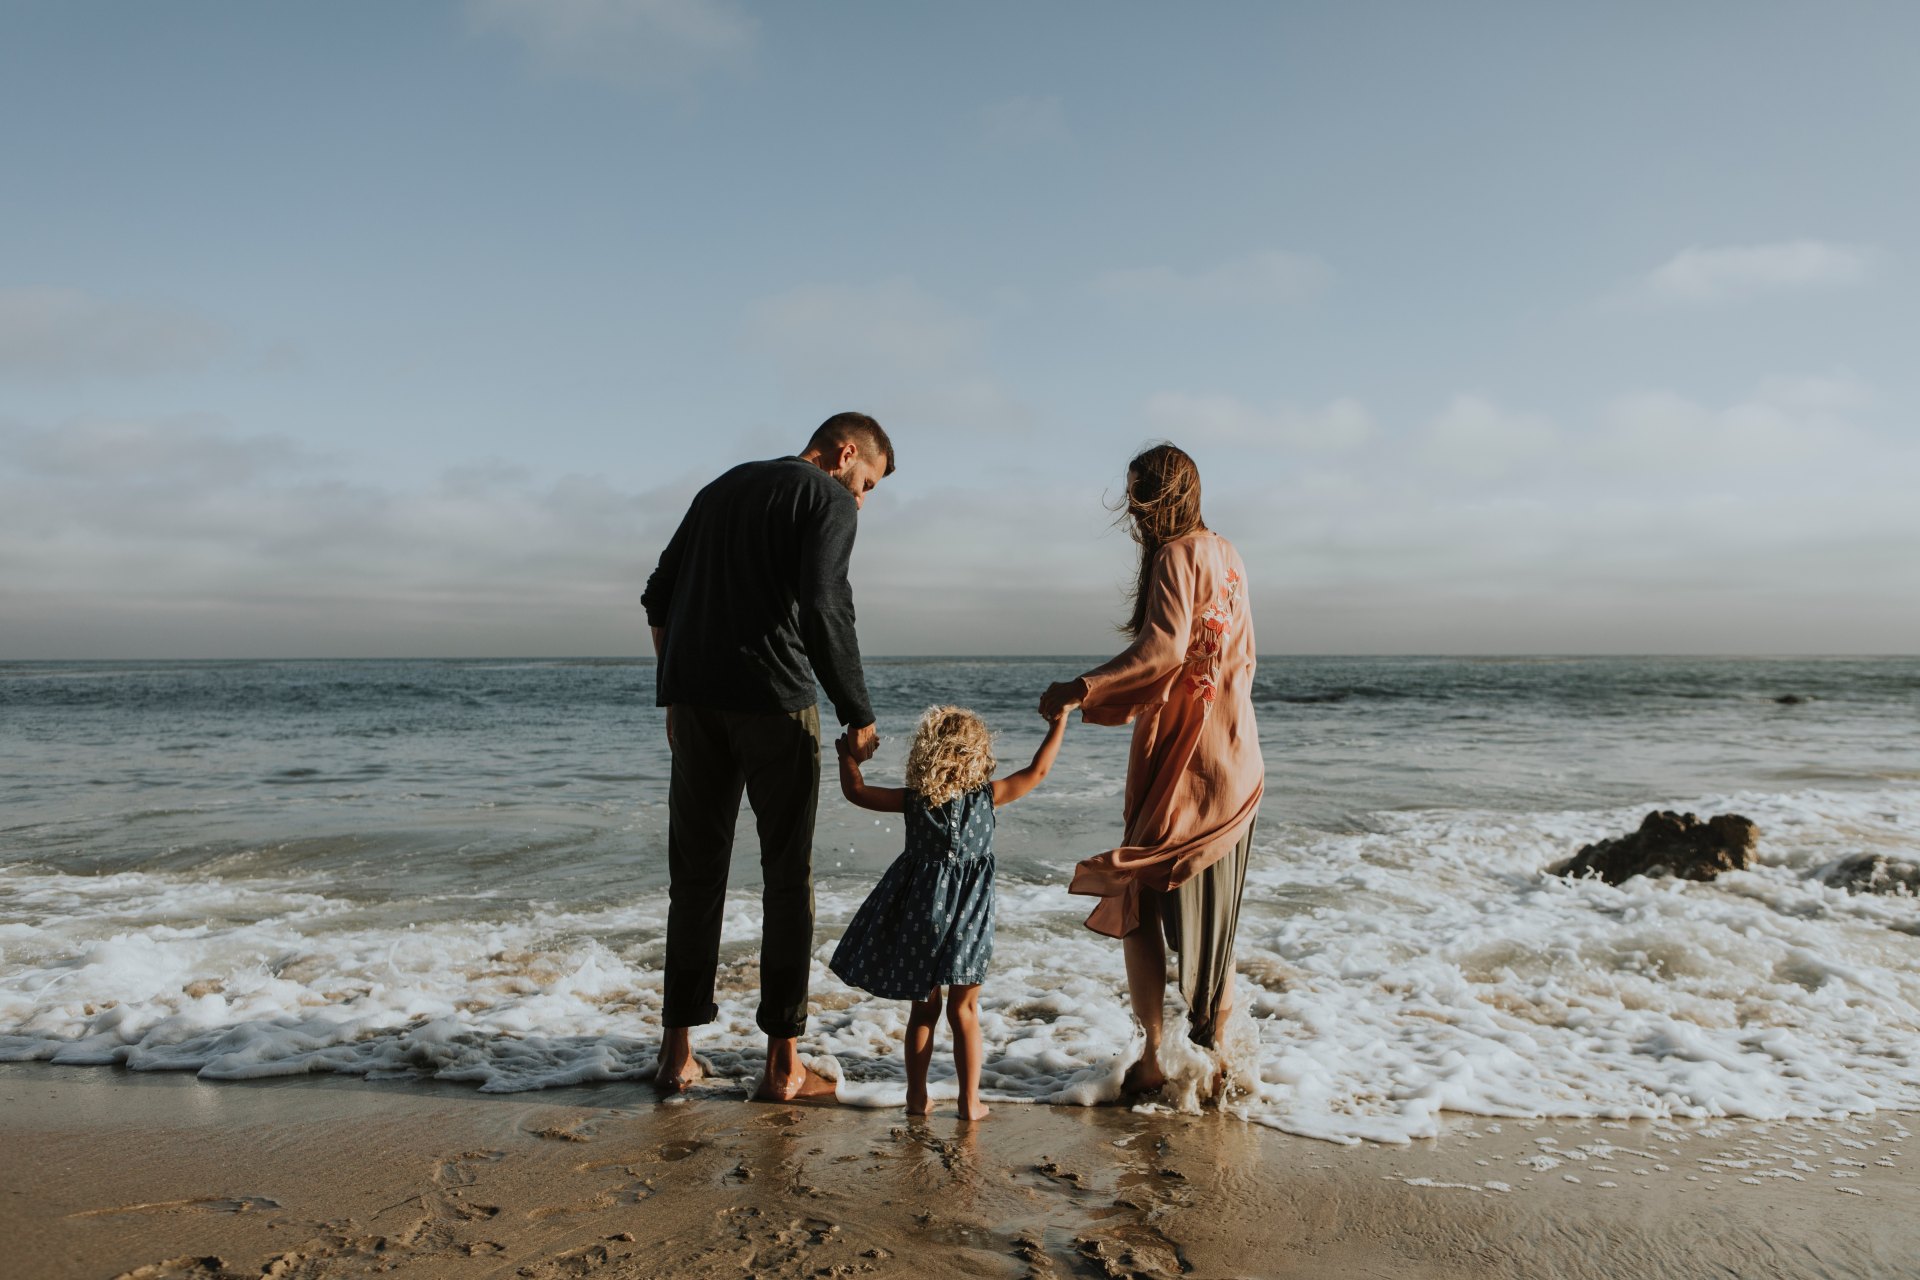 What No One Tells You About Getting Divorced When You Have Kids